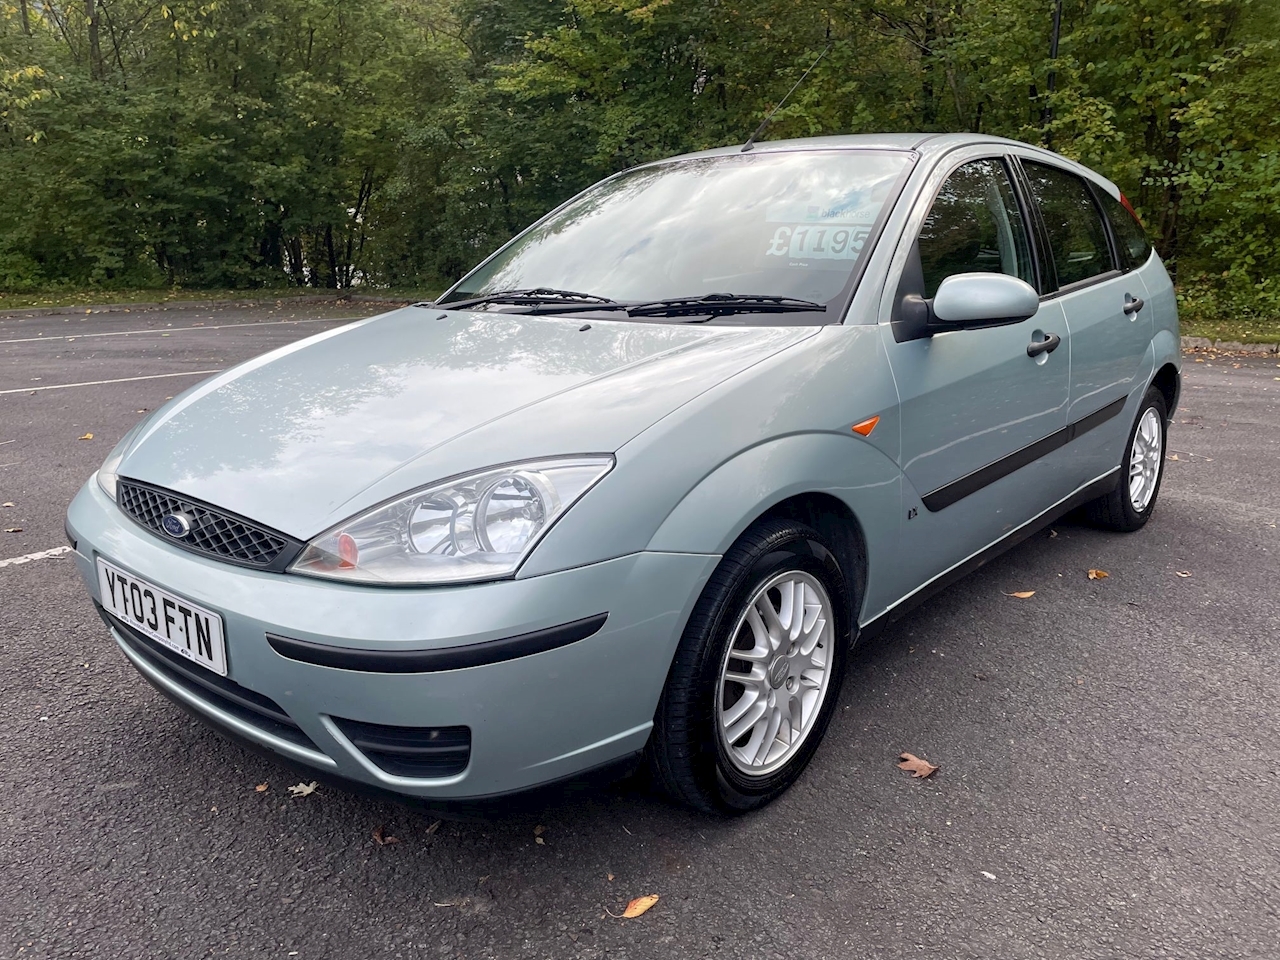 Used 2003 Ford Focus i LX For Sale in Mid Glamorgan (U2099 